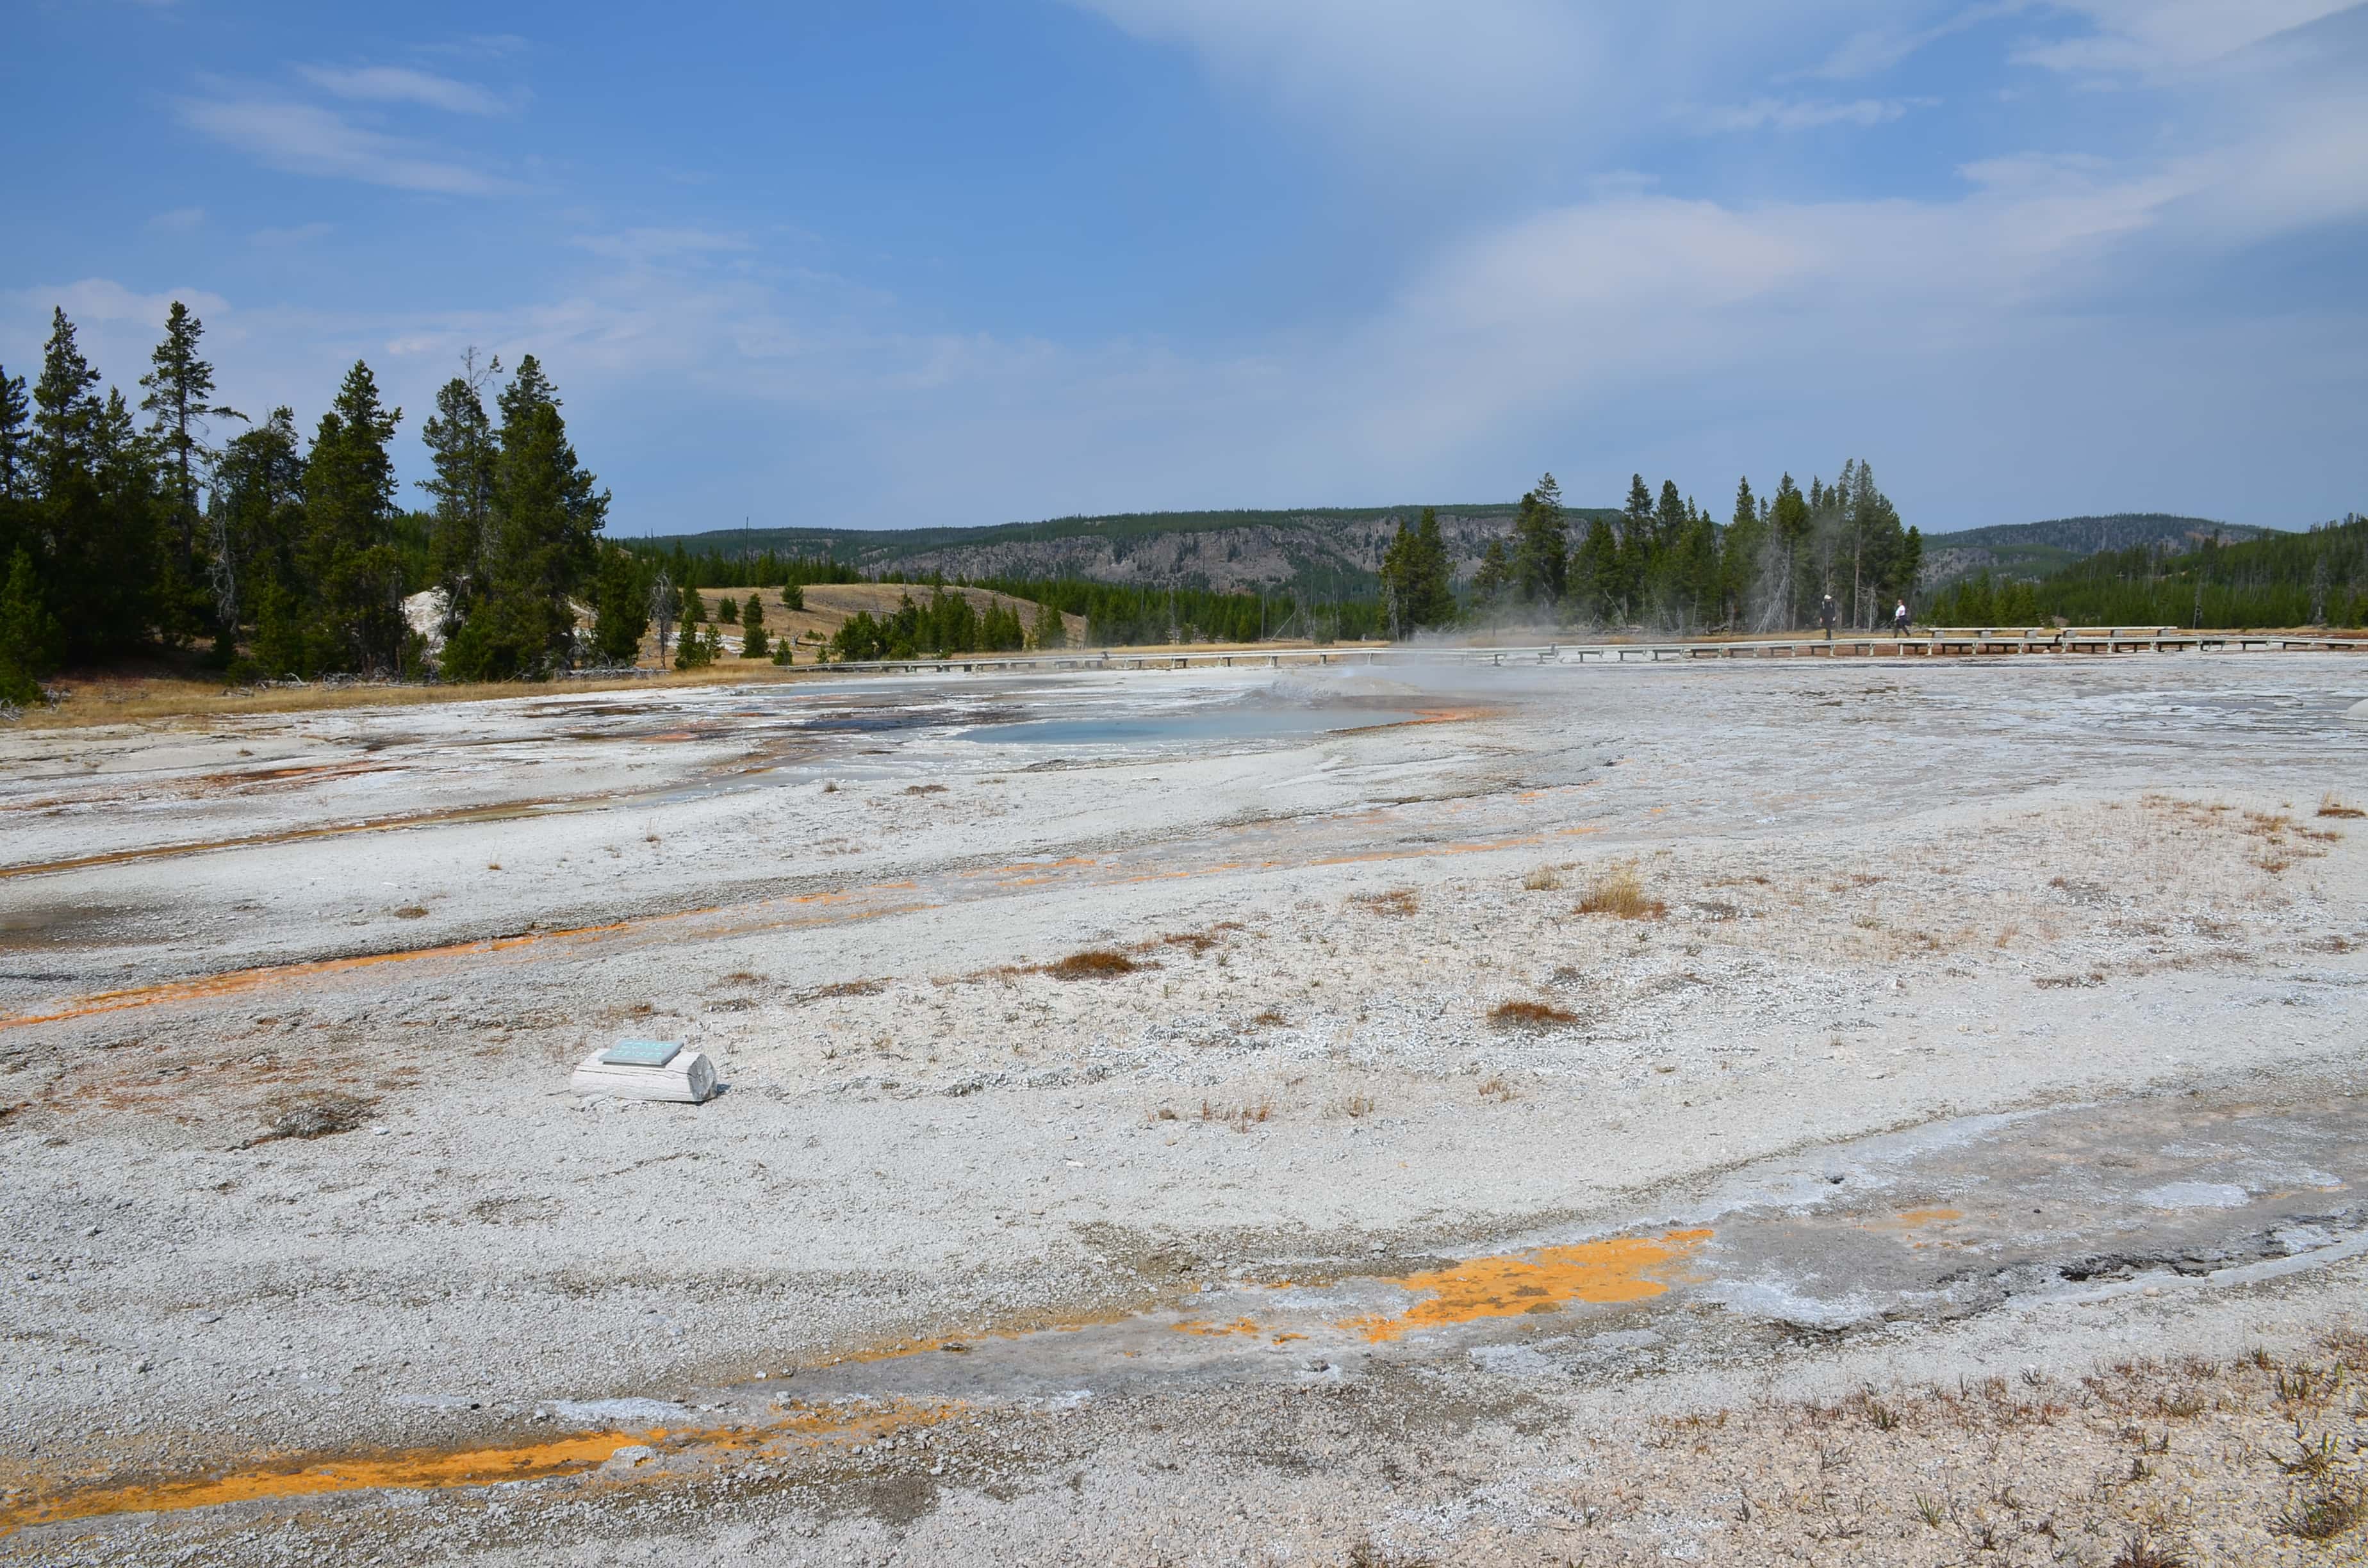 Daisy Group at the Upper Geyser Basin in Yellowstone National Park, Wyoming